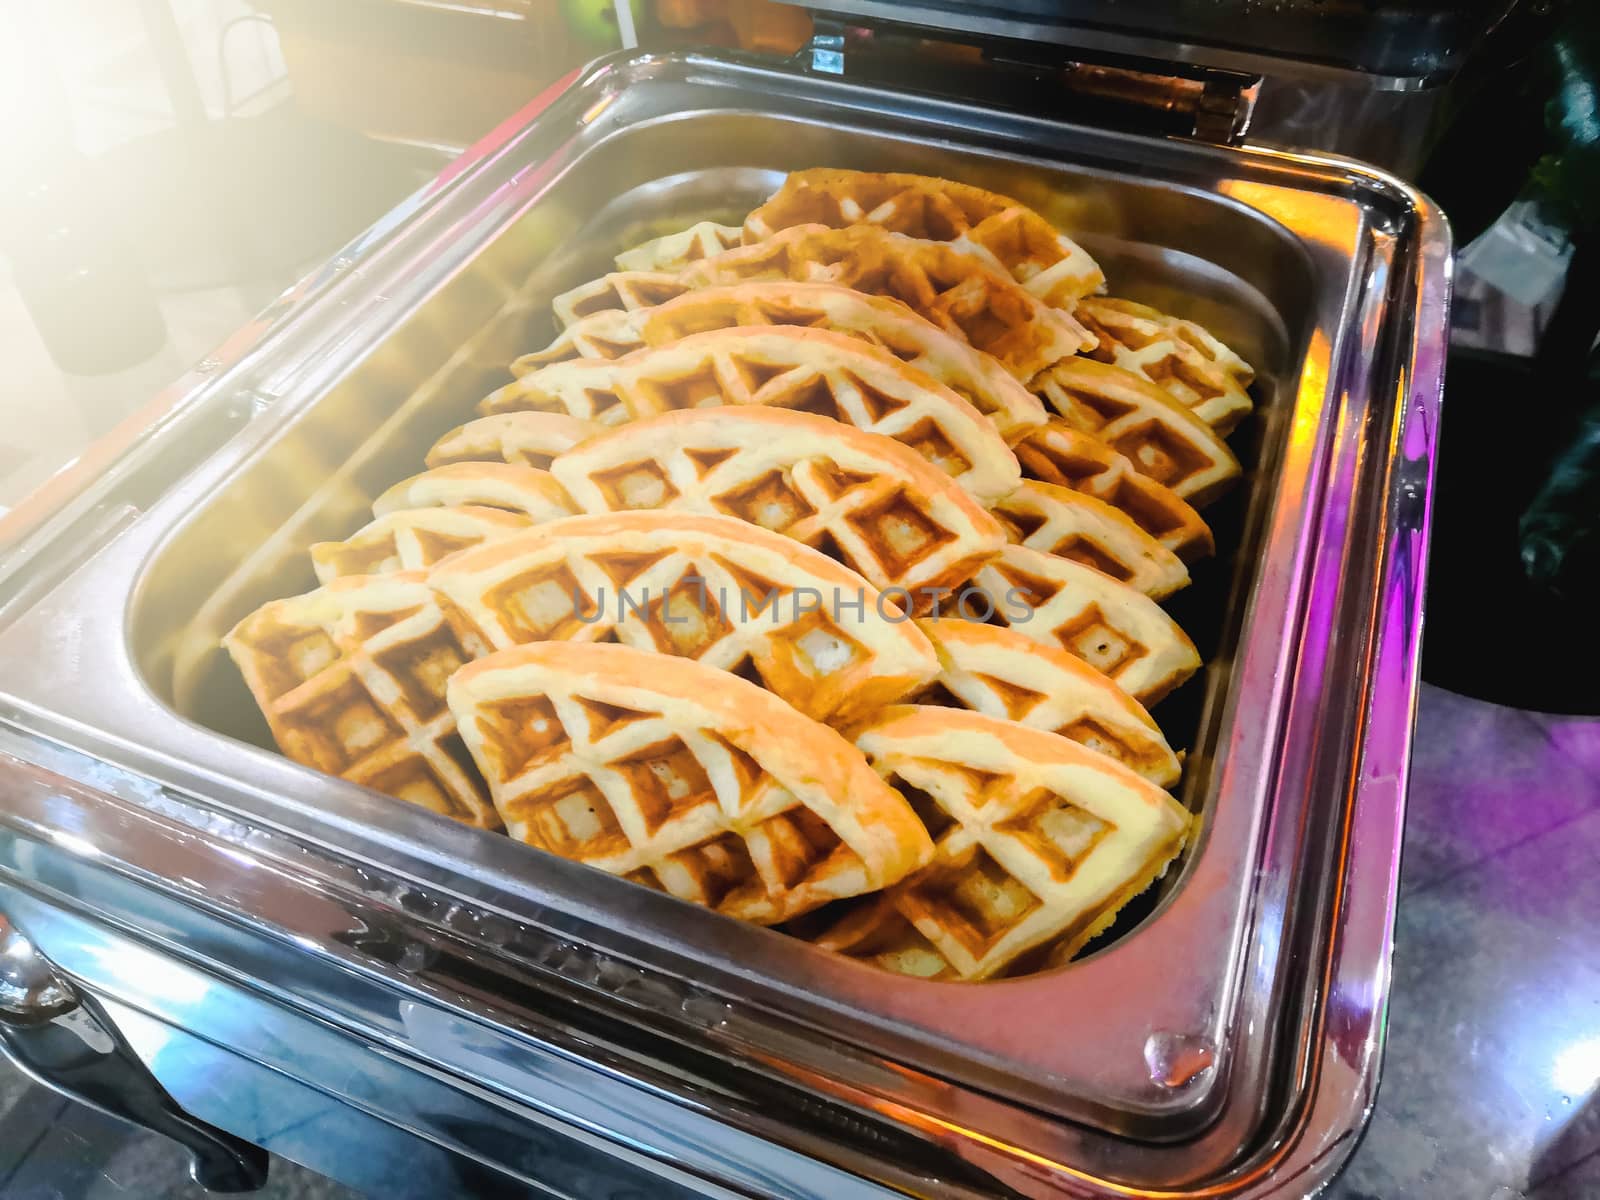 Waffles are prepared for customers in restaurants.